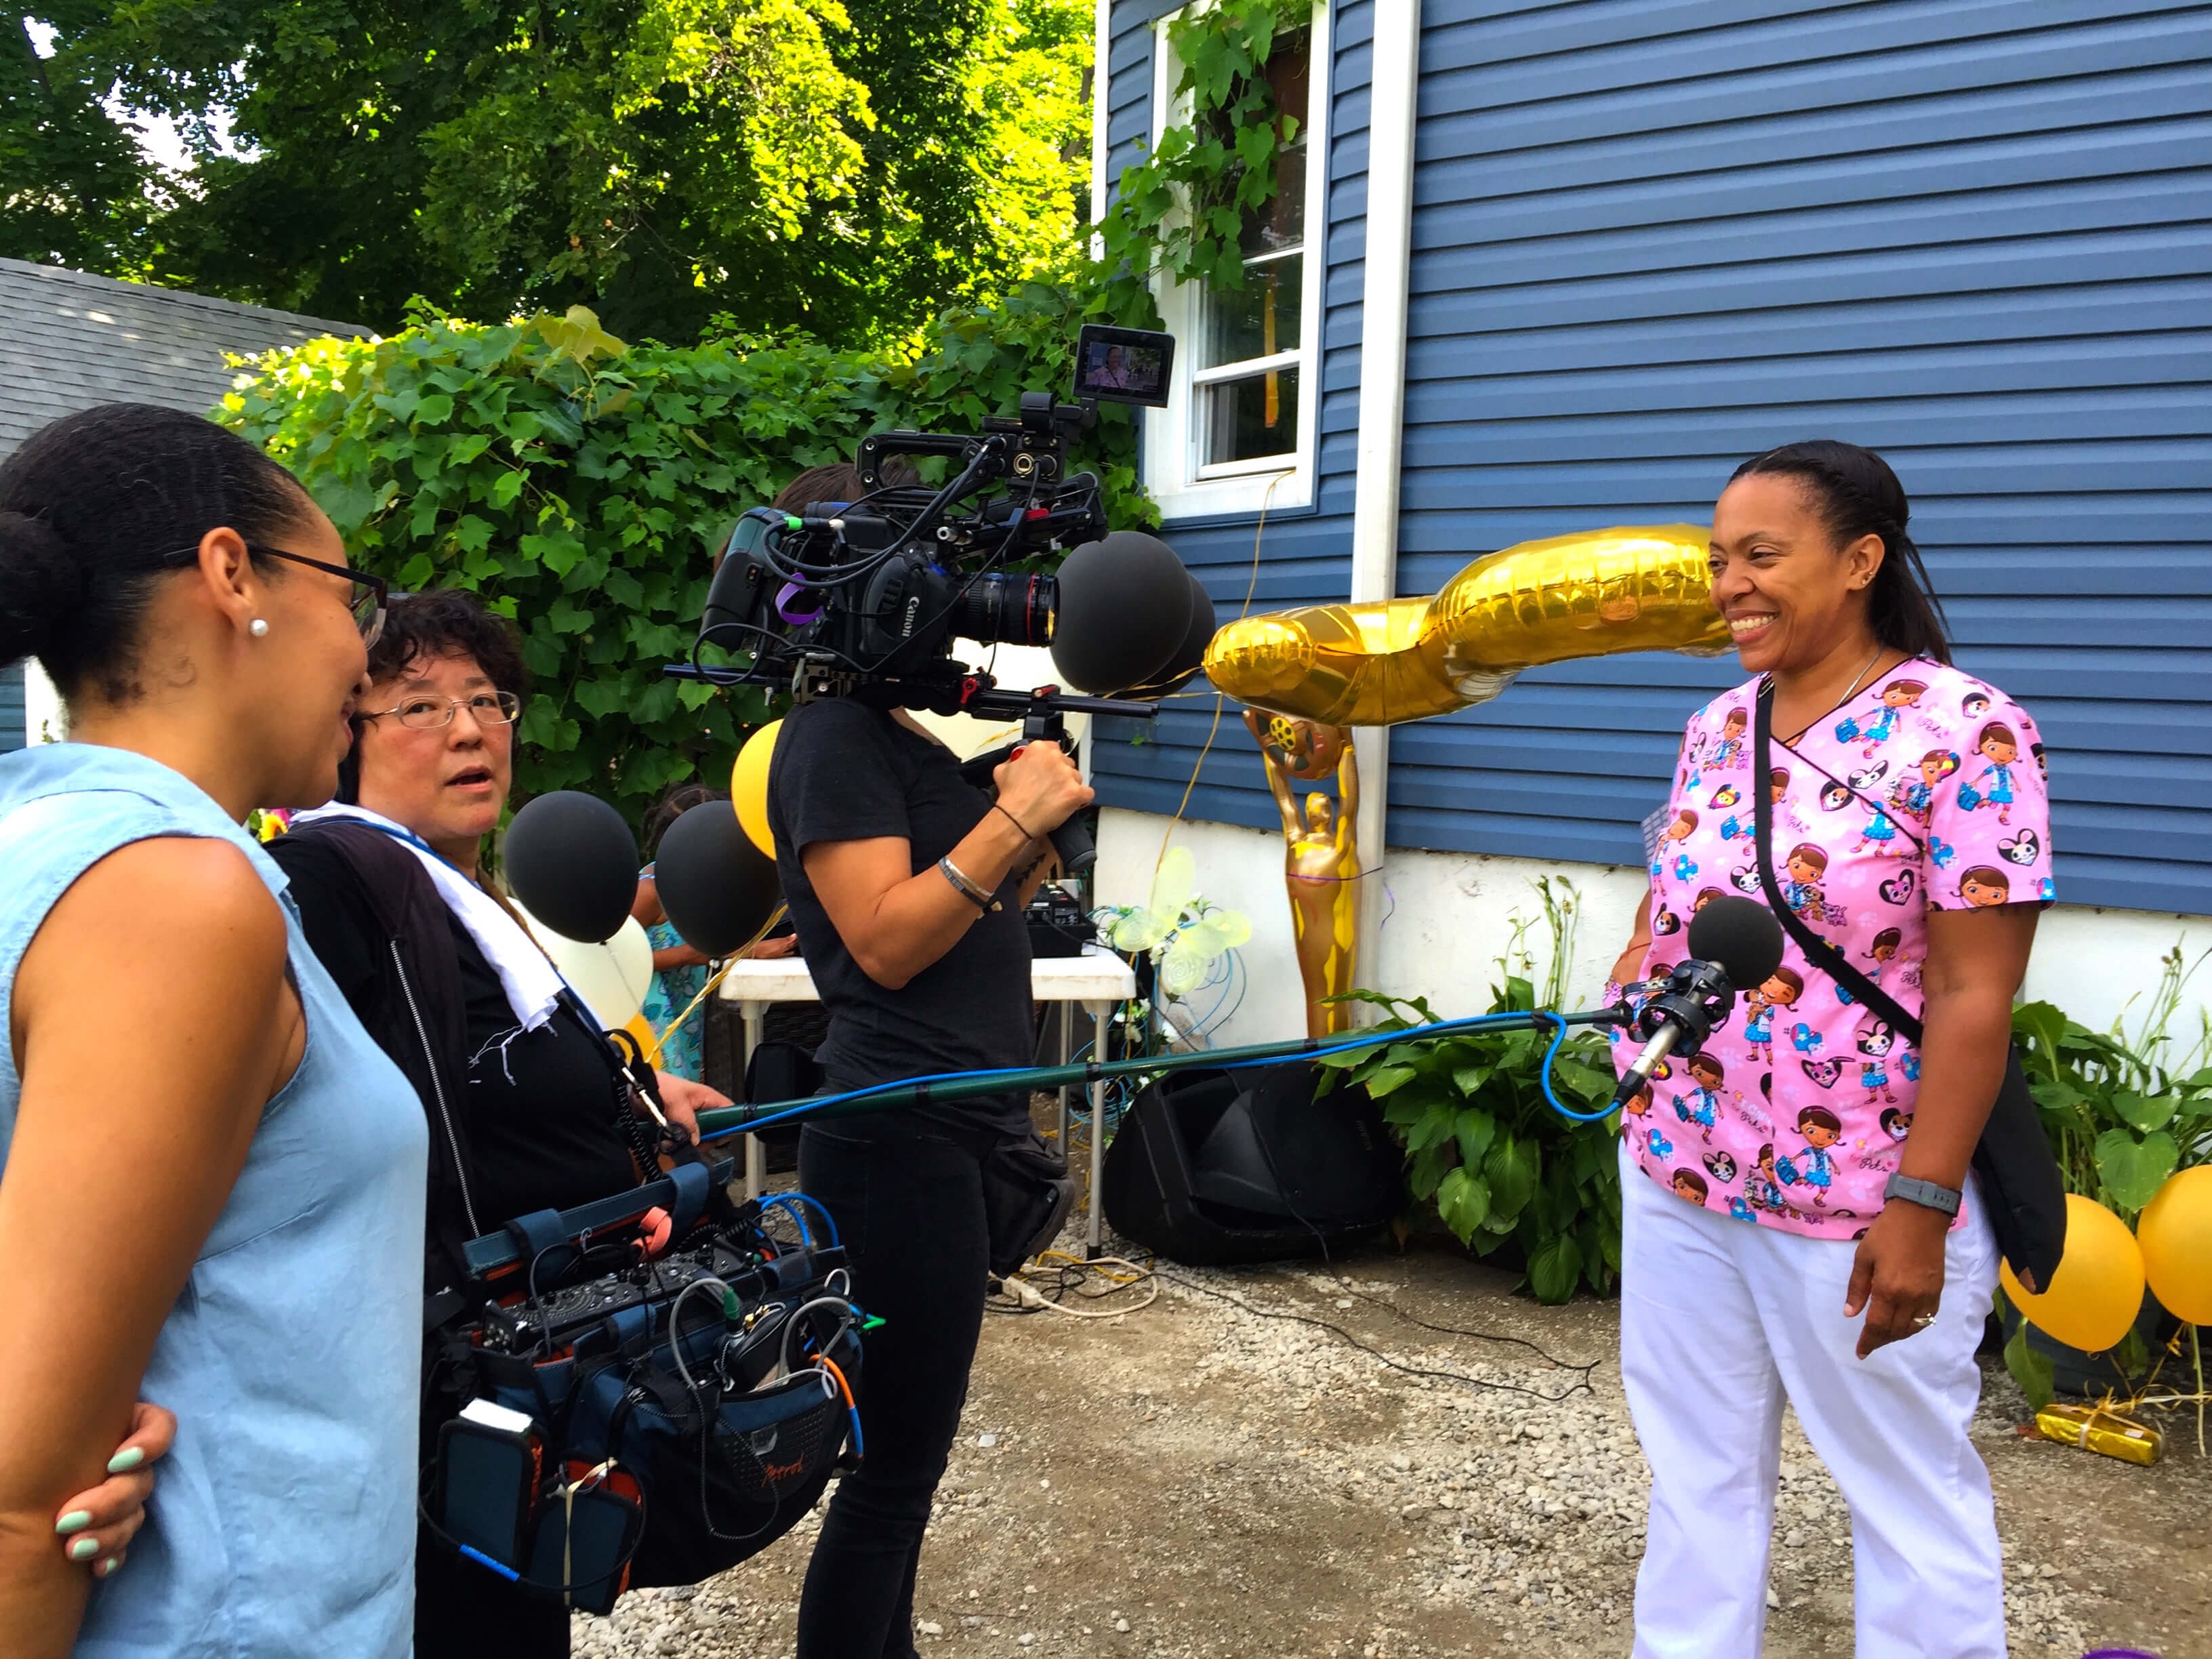 A camerawoman and a soundperson are interviewing a woman in a pink uniform. They are all standing in front of a blue house.